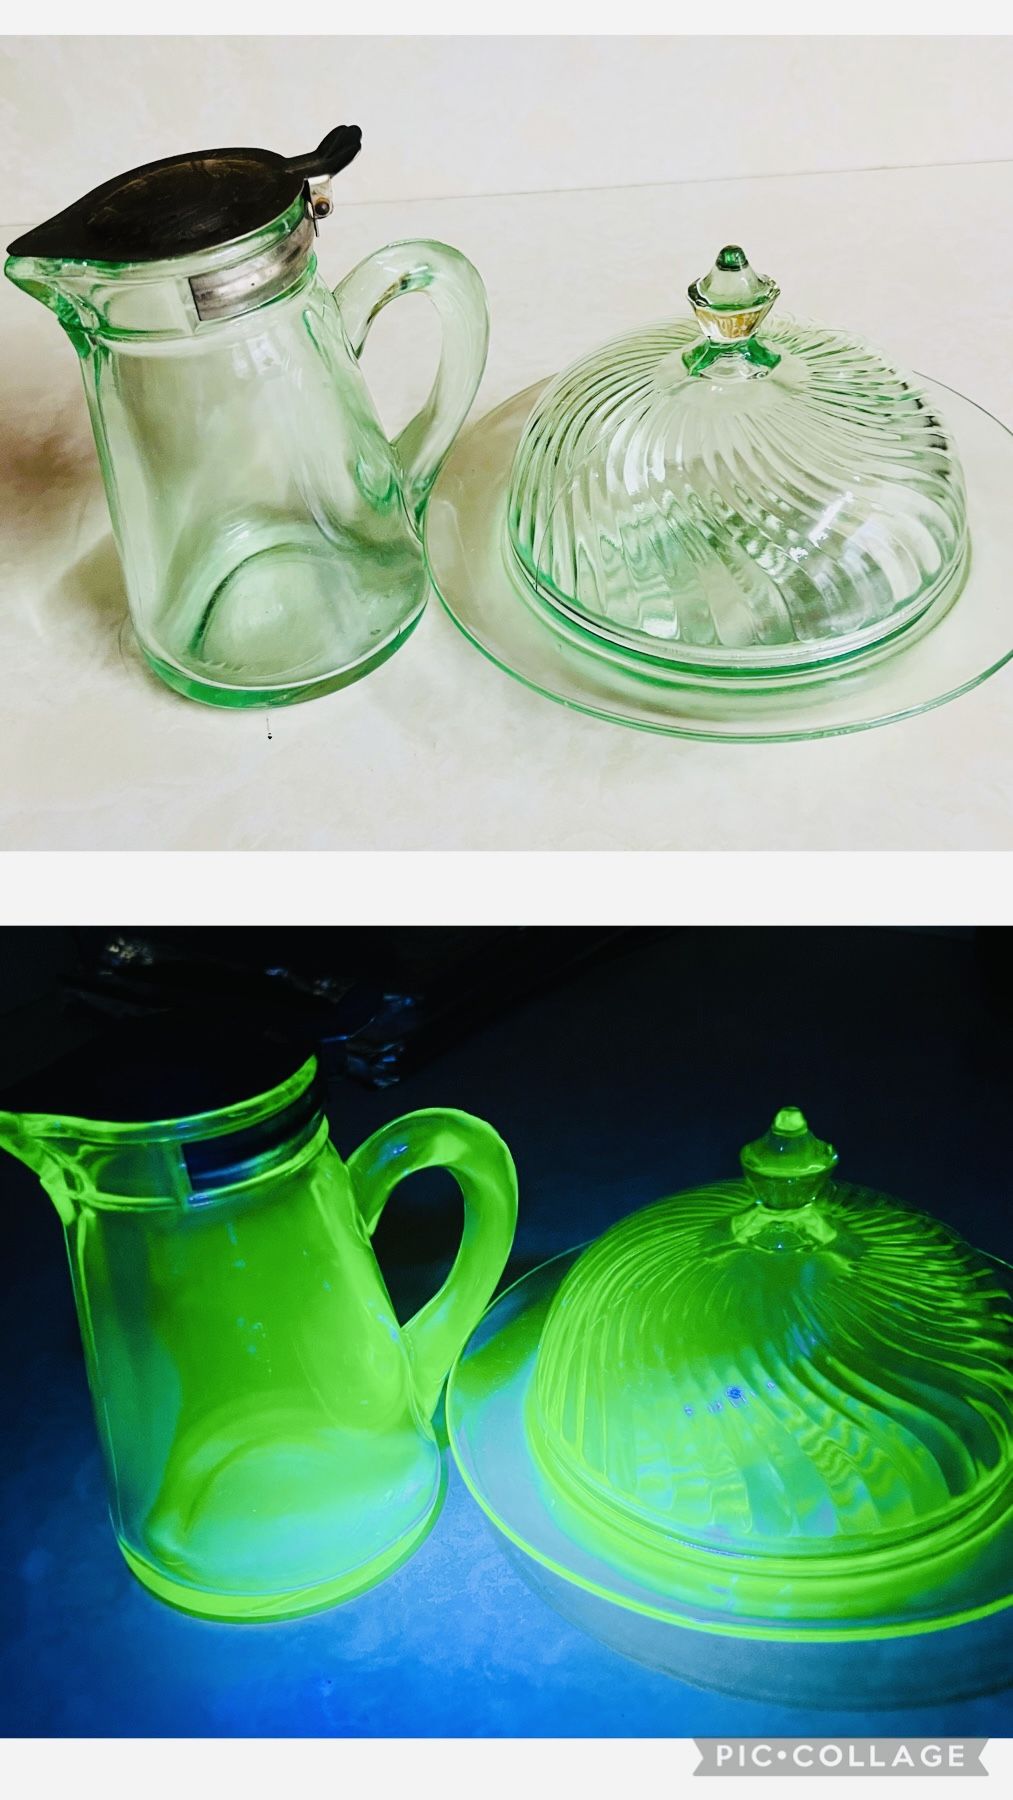 Rare 1916 Uranium Syrup Pitcher w/ Spring Lid & 1930s US Glass Green Covered Butter Dish